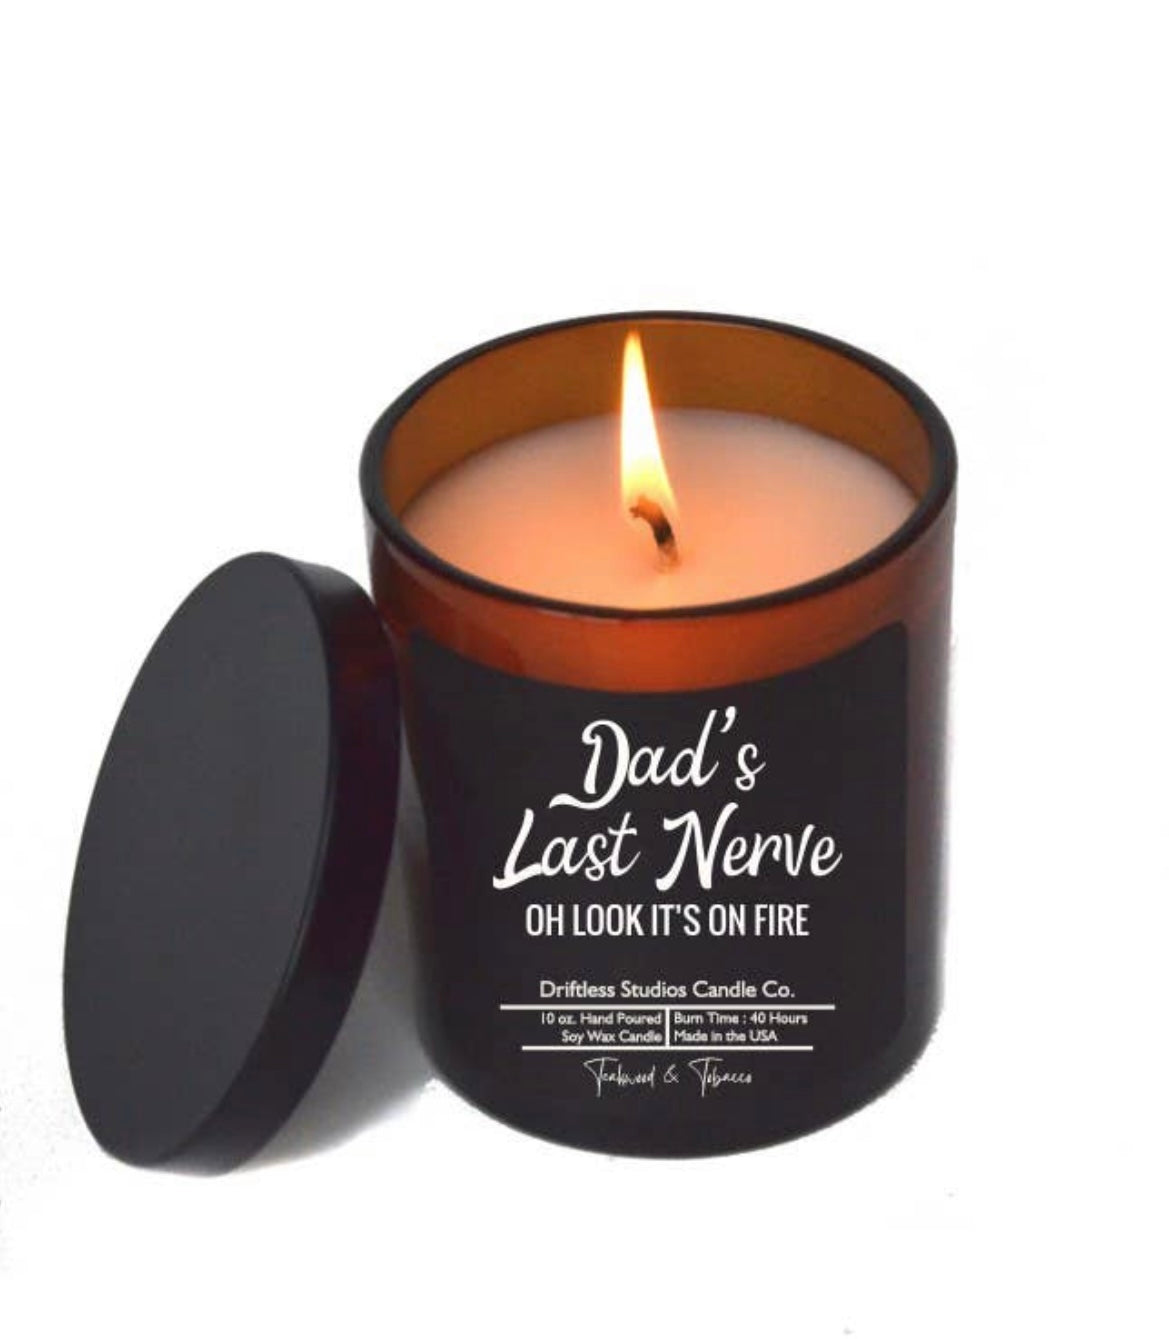 Dads Last Nerve Candle